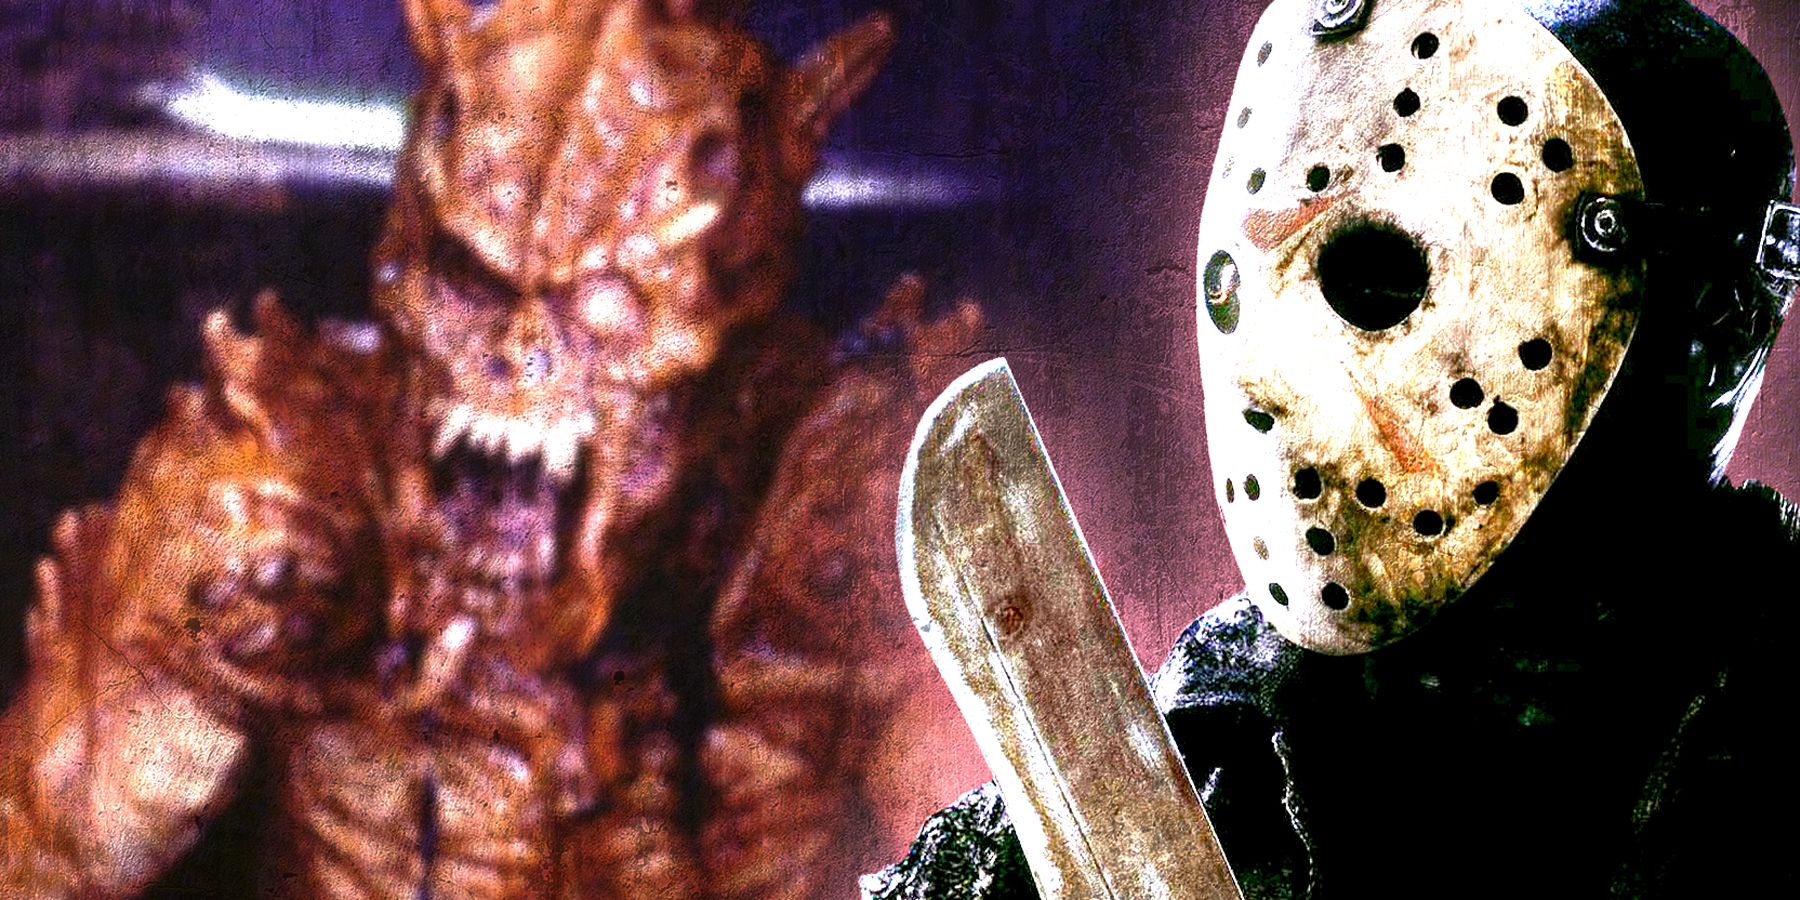 Friday the 13th Jason Voorhees' final form in Jason Goes to Hell